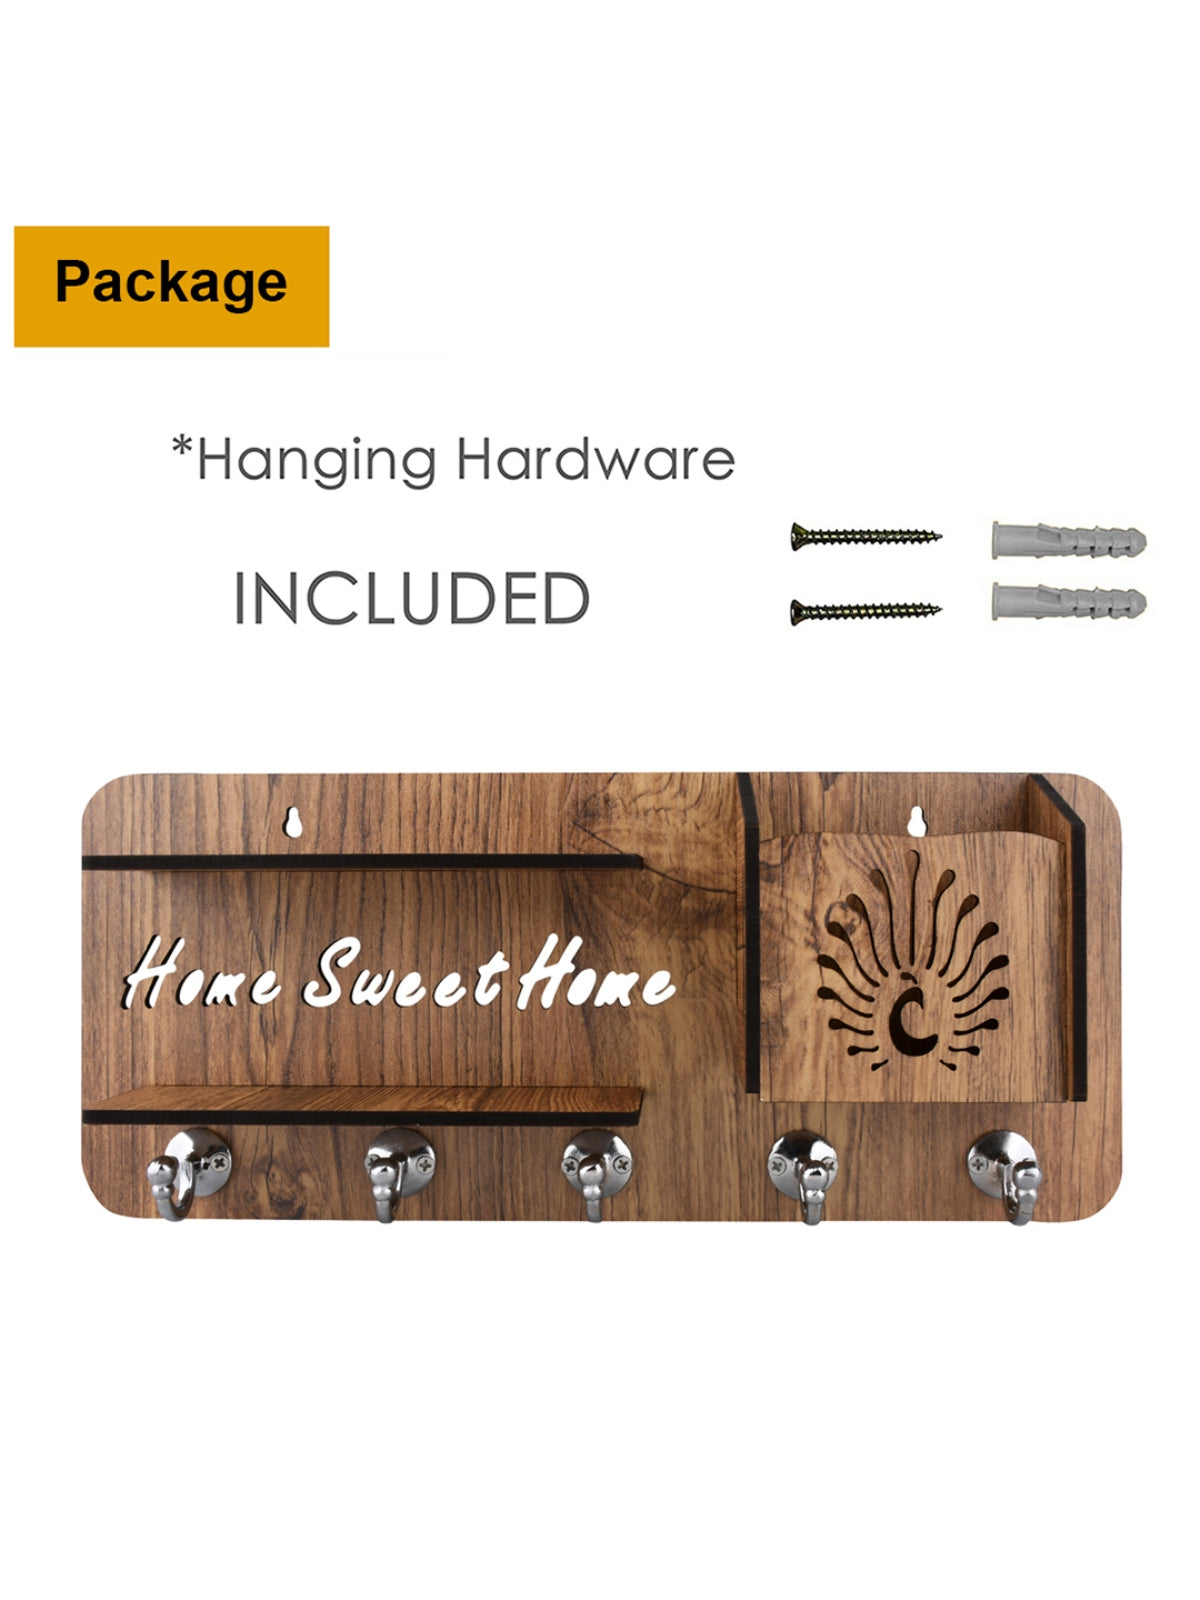 Wooden Key Holder With 2 Shelf & 1 Mobile Stand Holder For Home & Office Wall Decorative